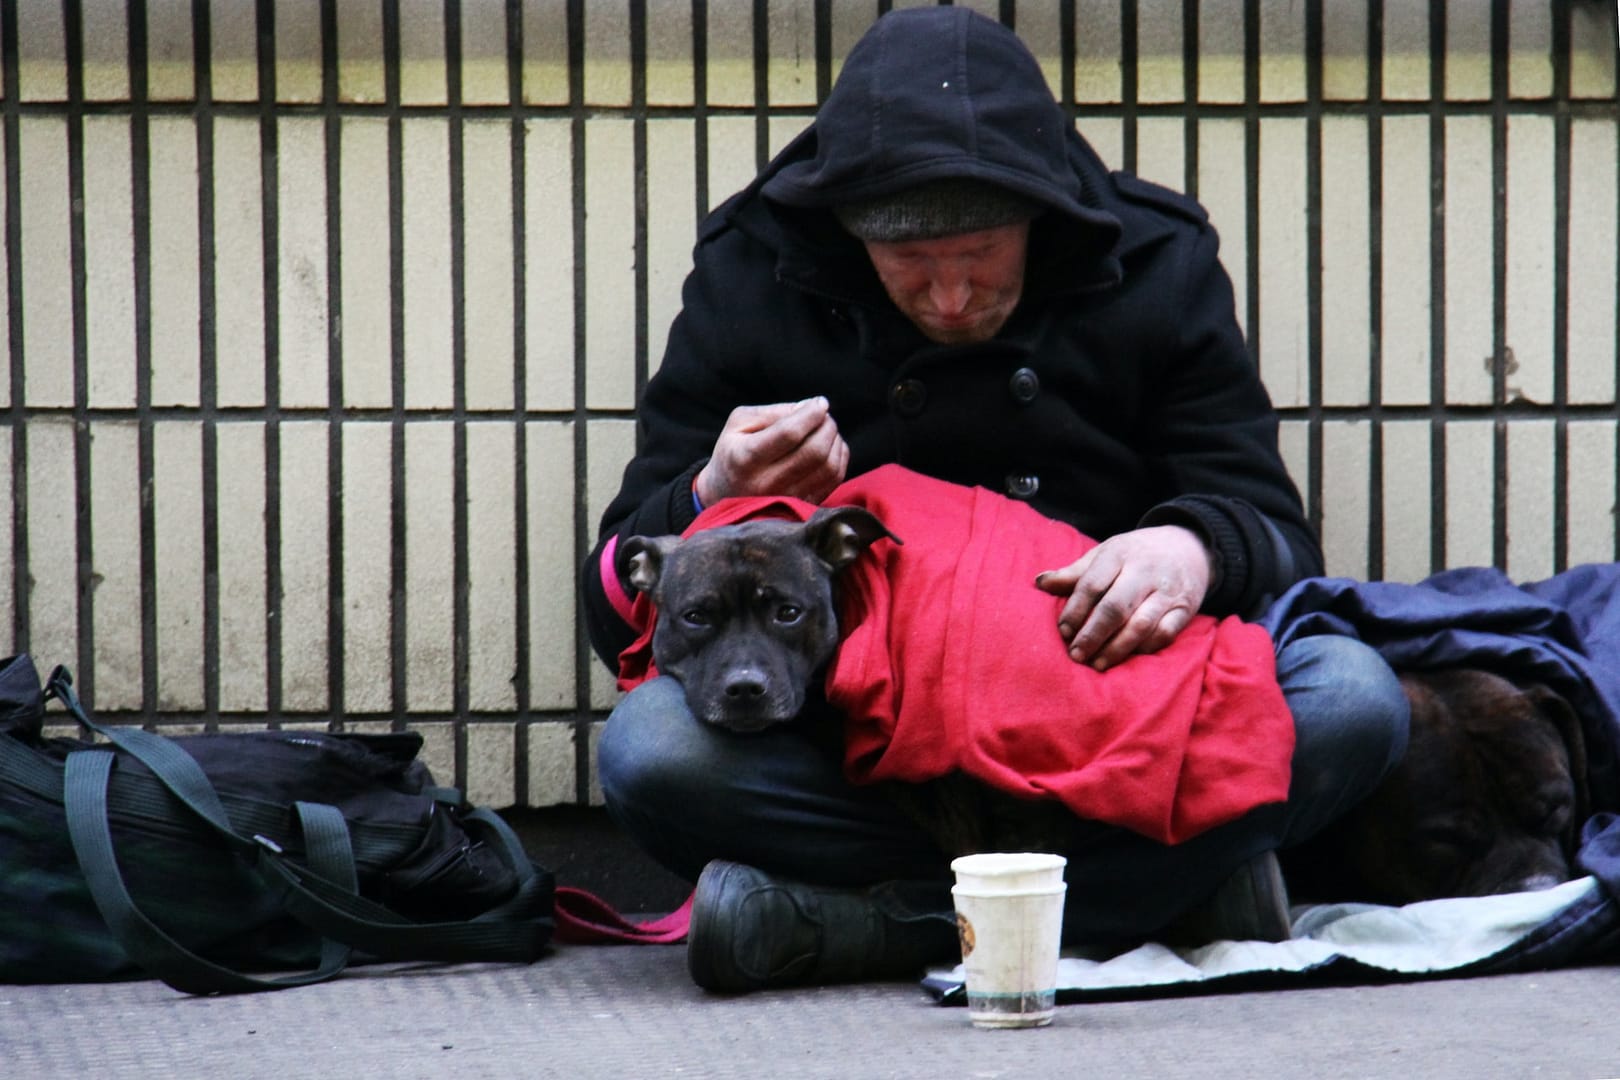 A homeless man with their dog